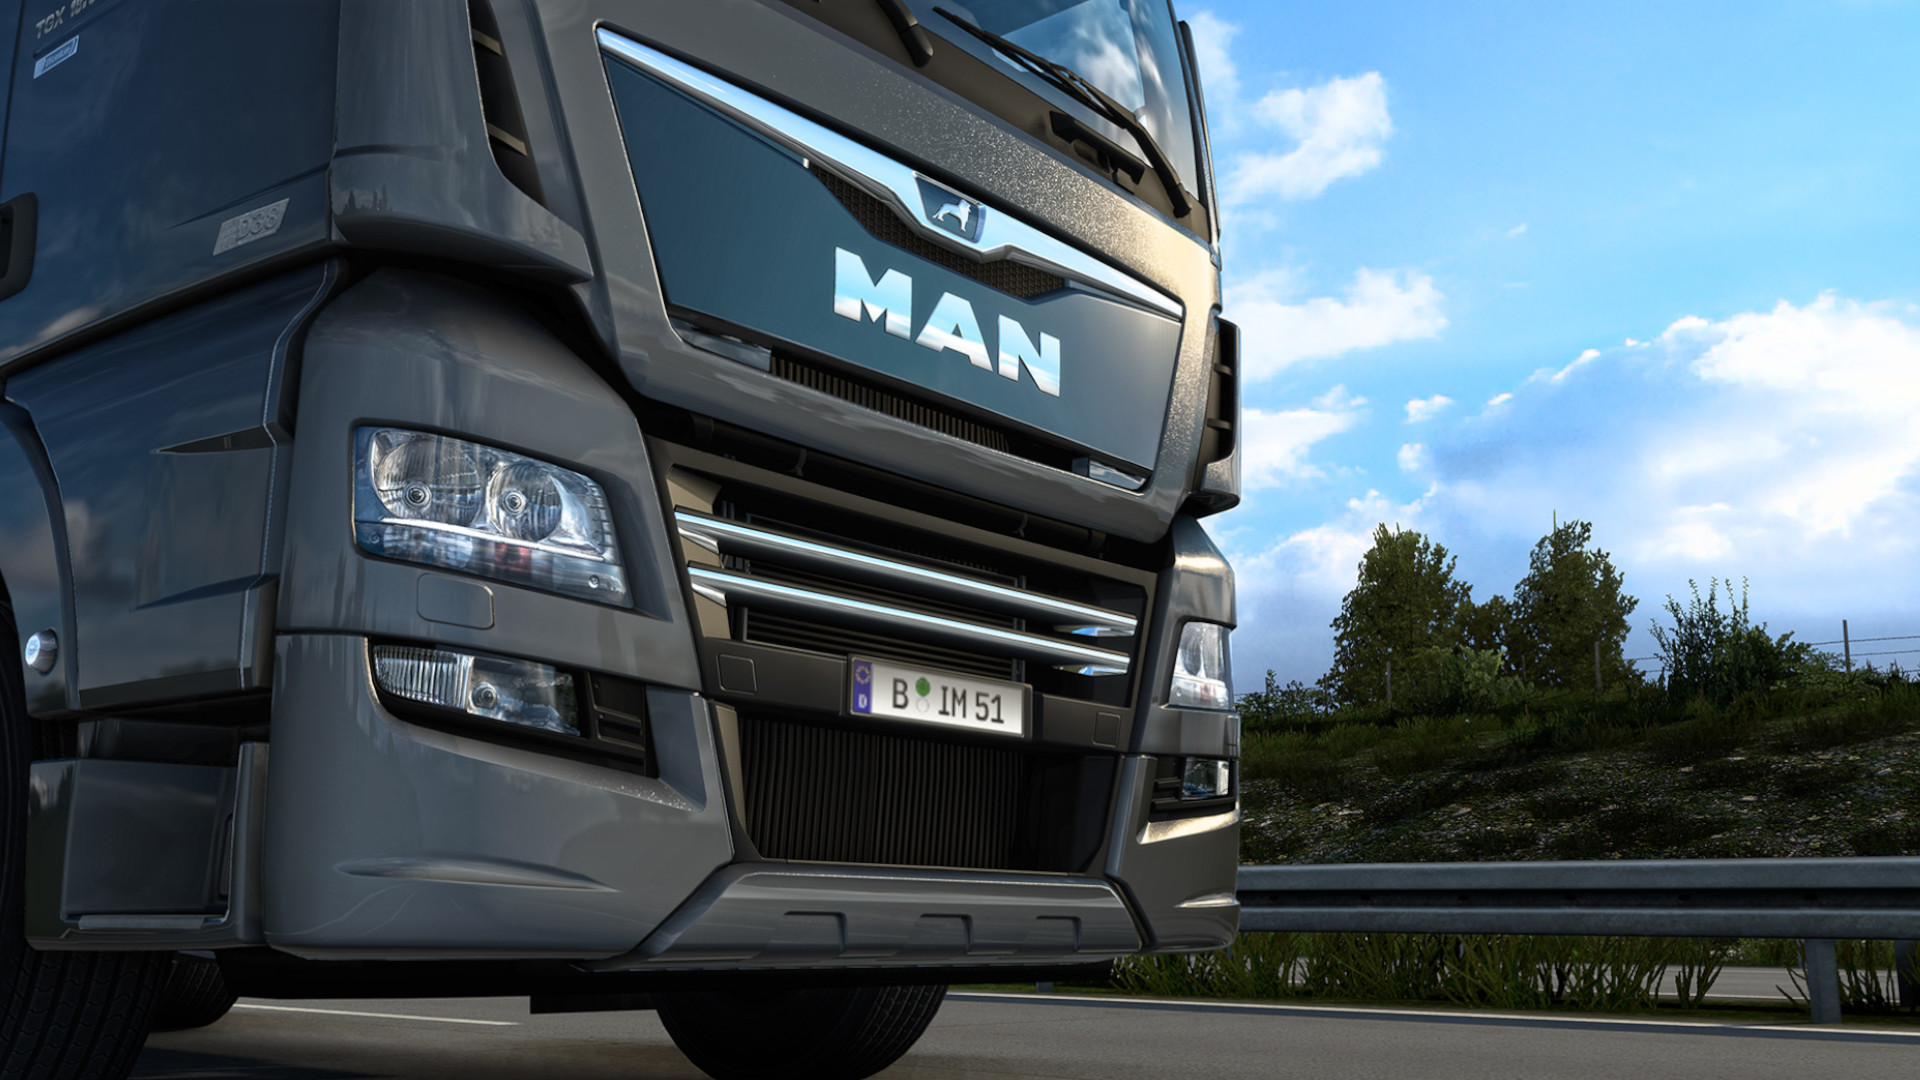 Euro Truck Simulator 2’s free 1.43 update will “tick off a debt” with a new truck